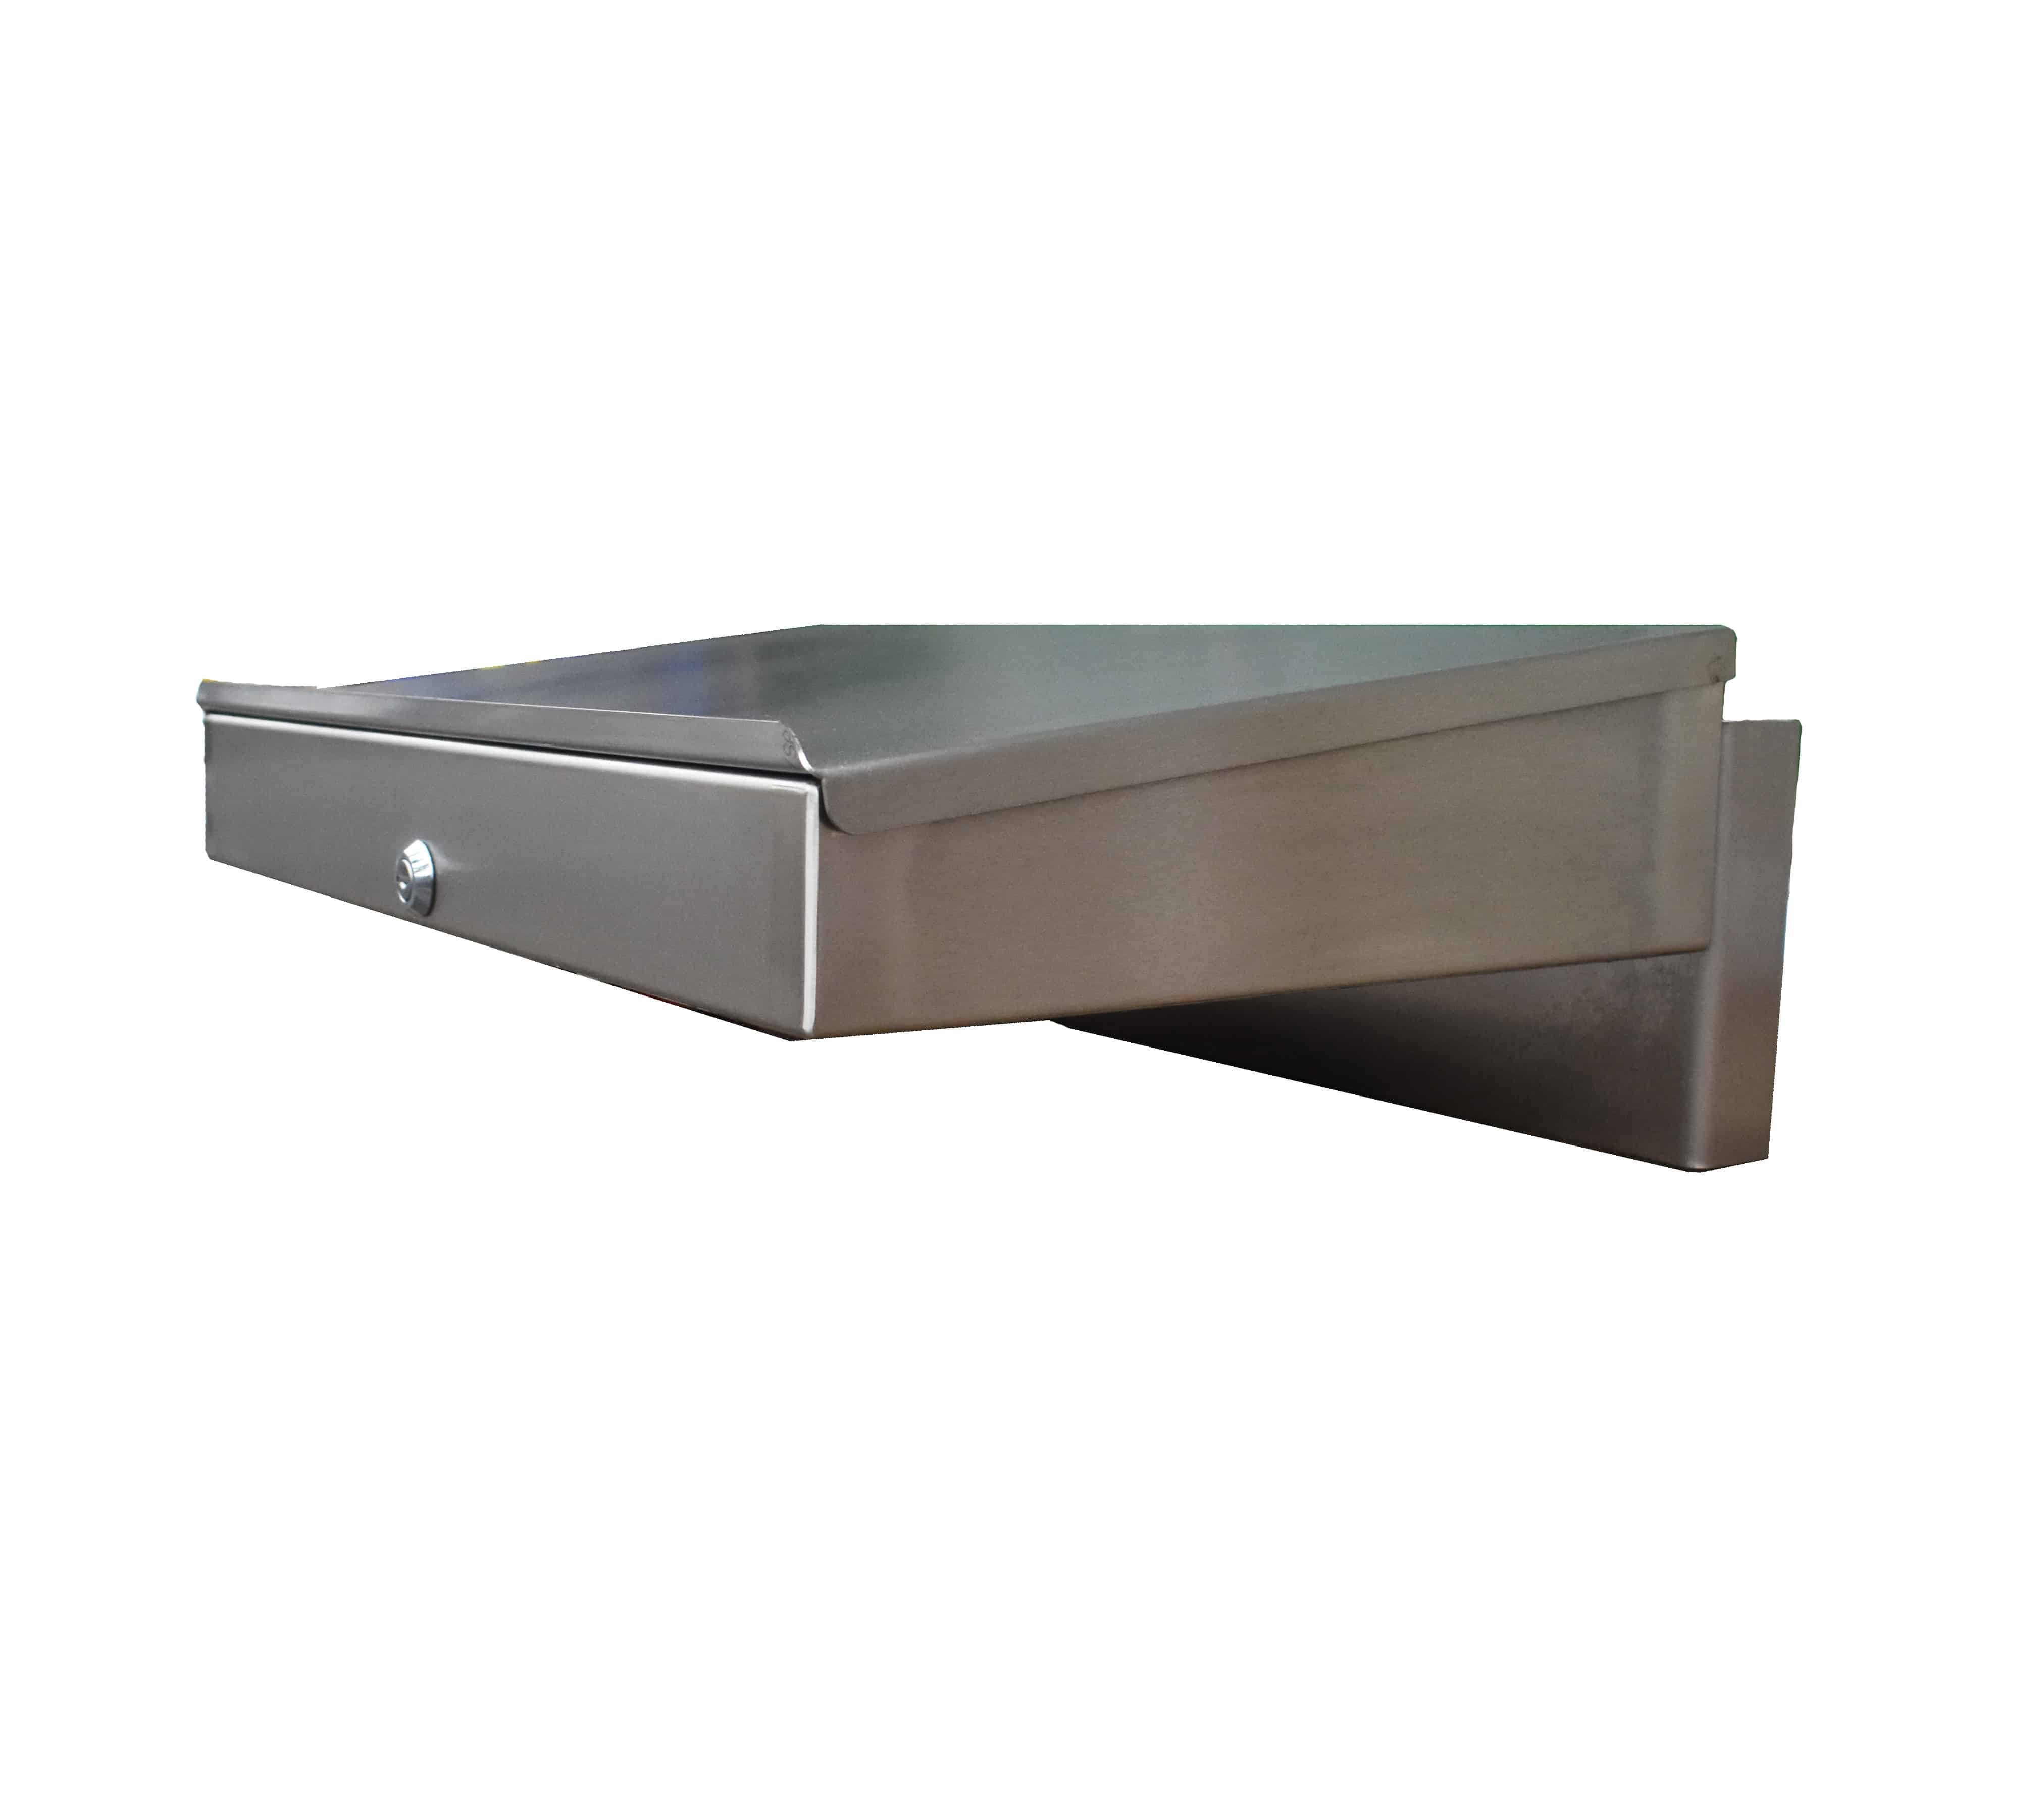 Stainless steel wall mounted writing desk